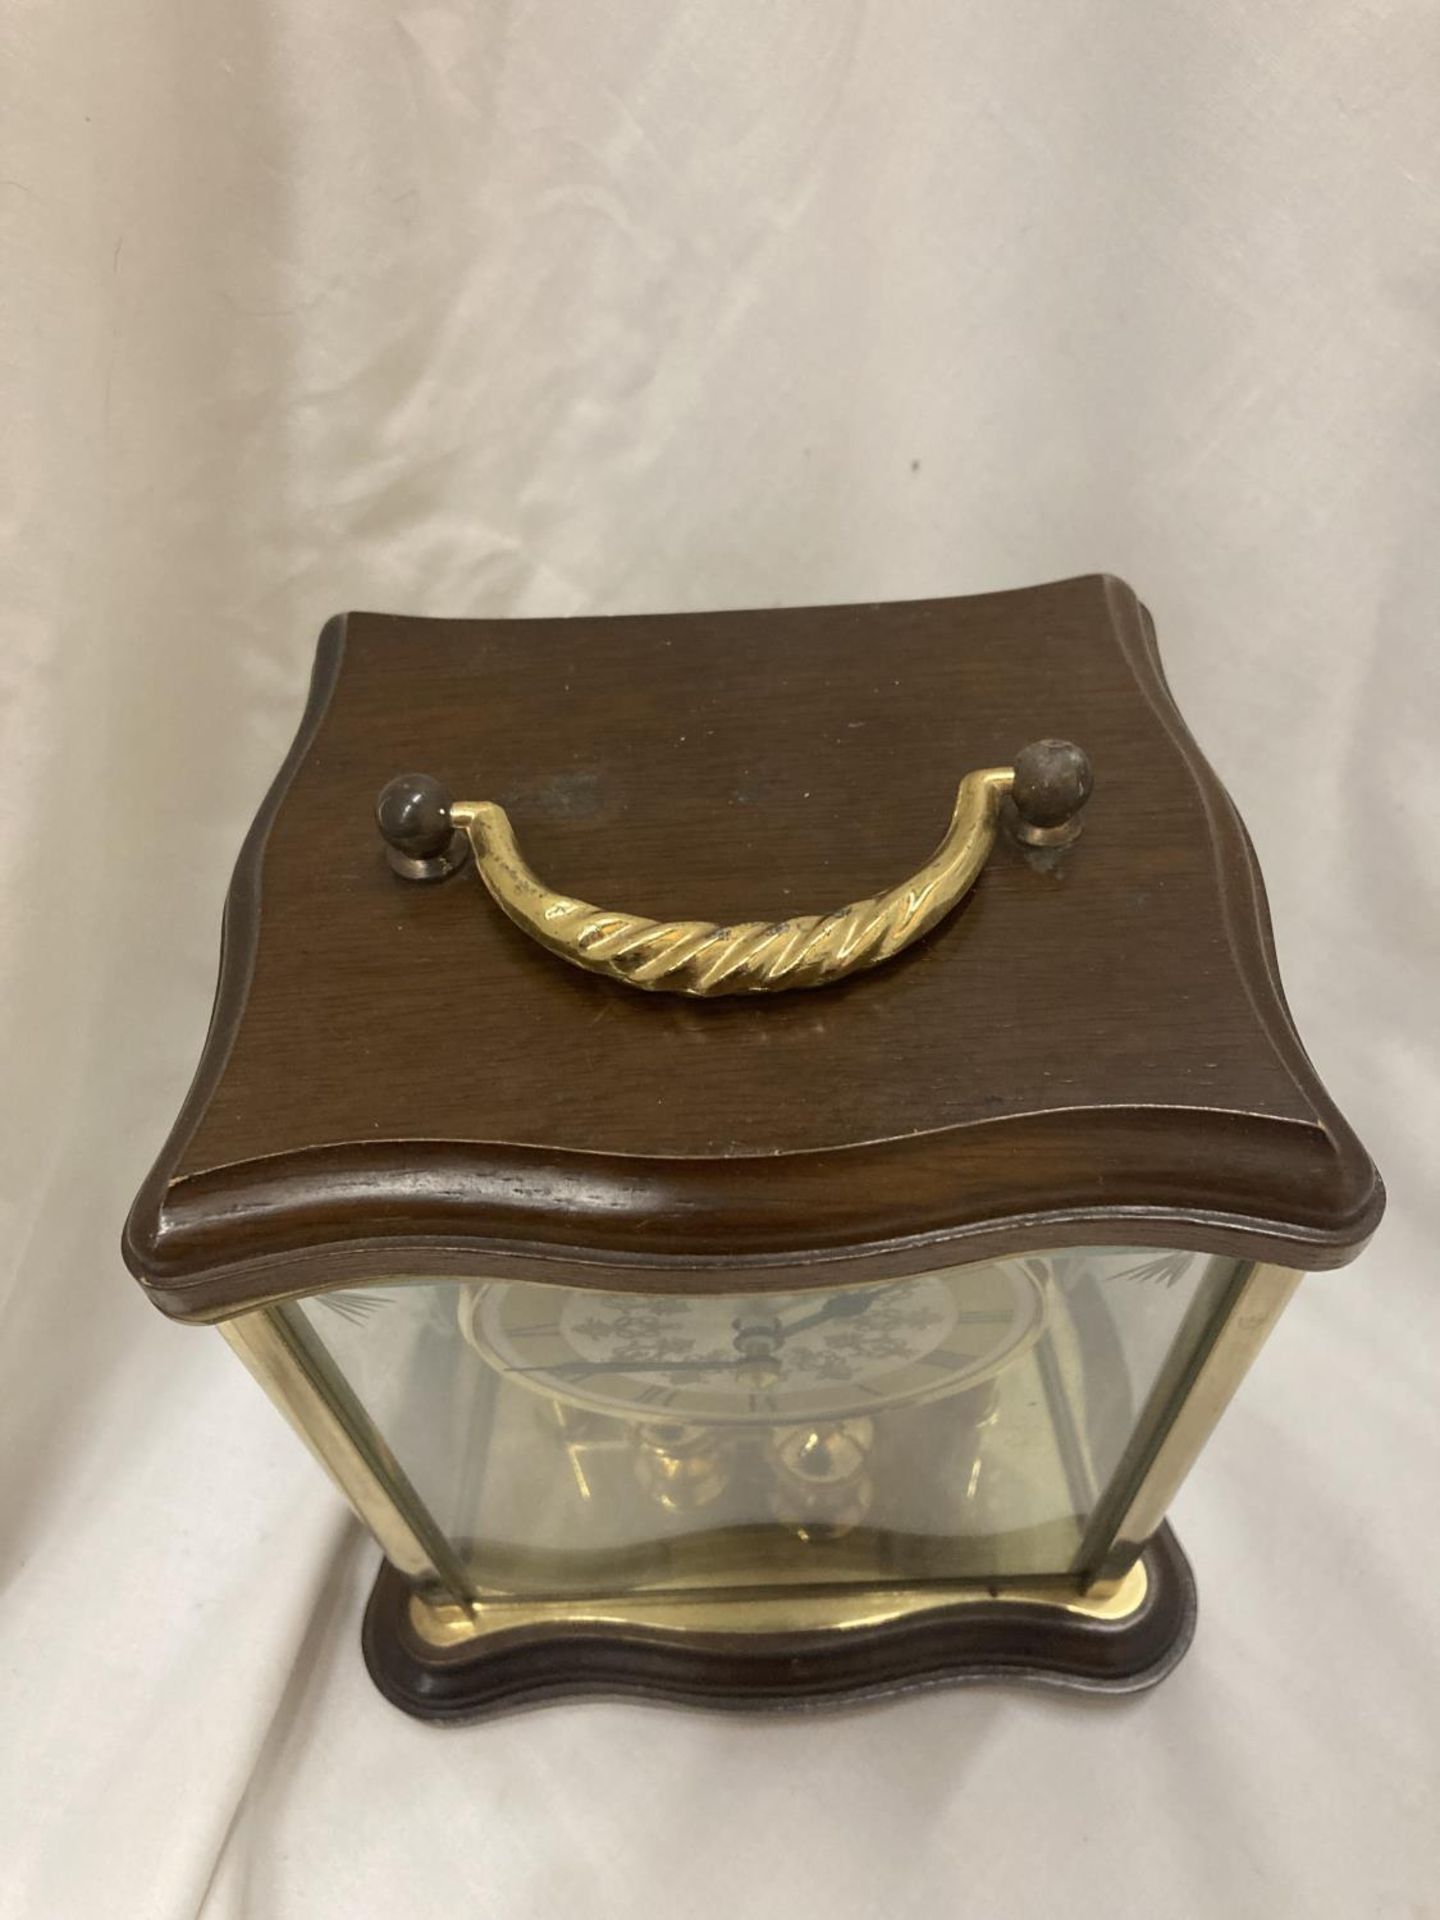 AN ACCTIM MANTLE CLOCK - Image 3 of 3